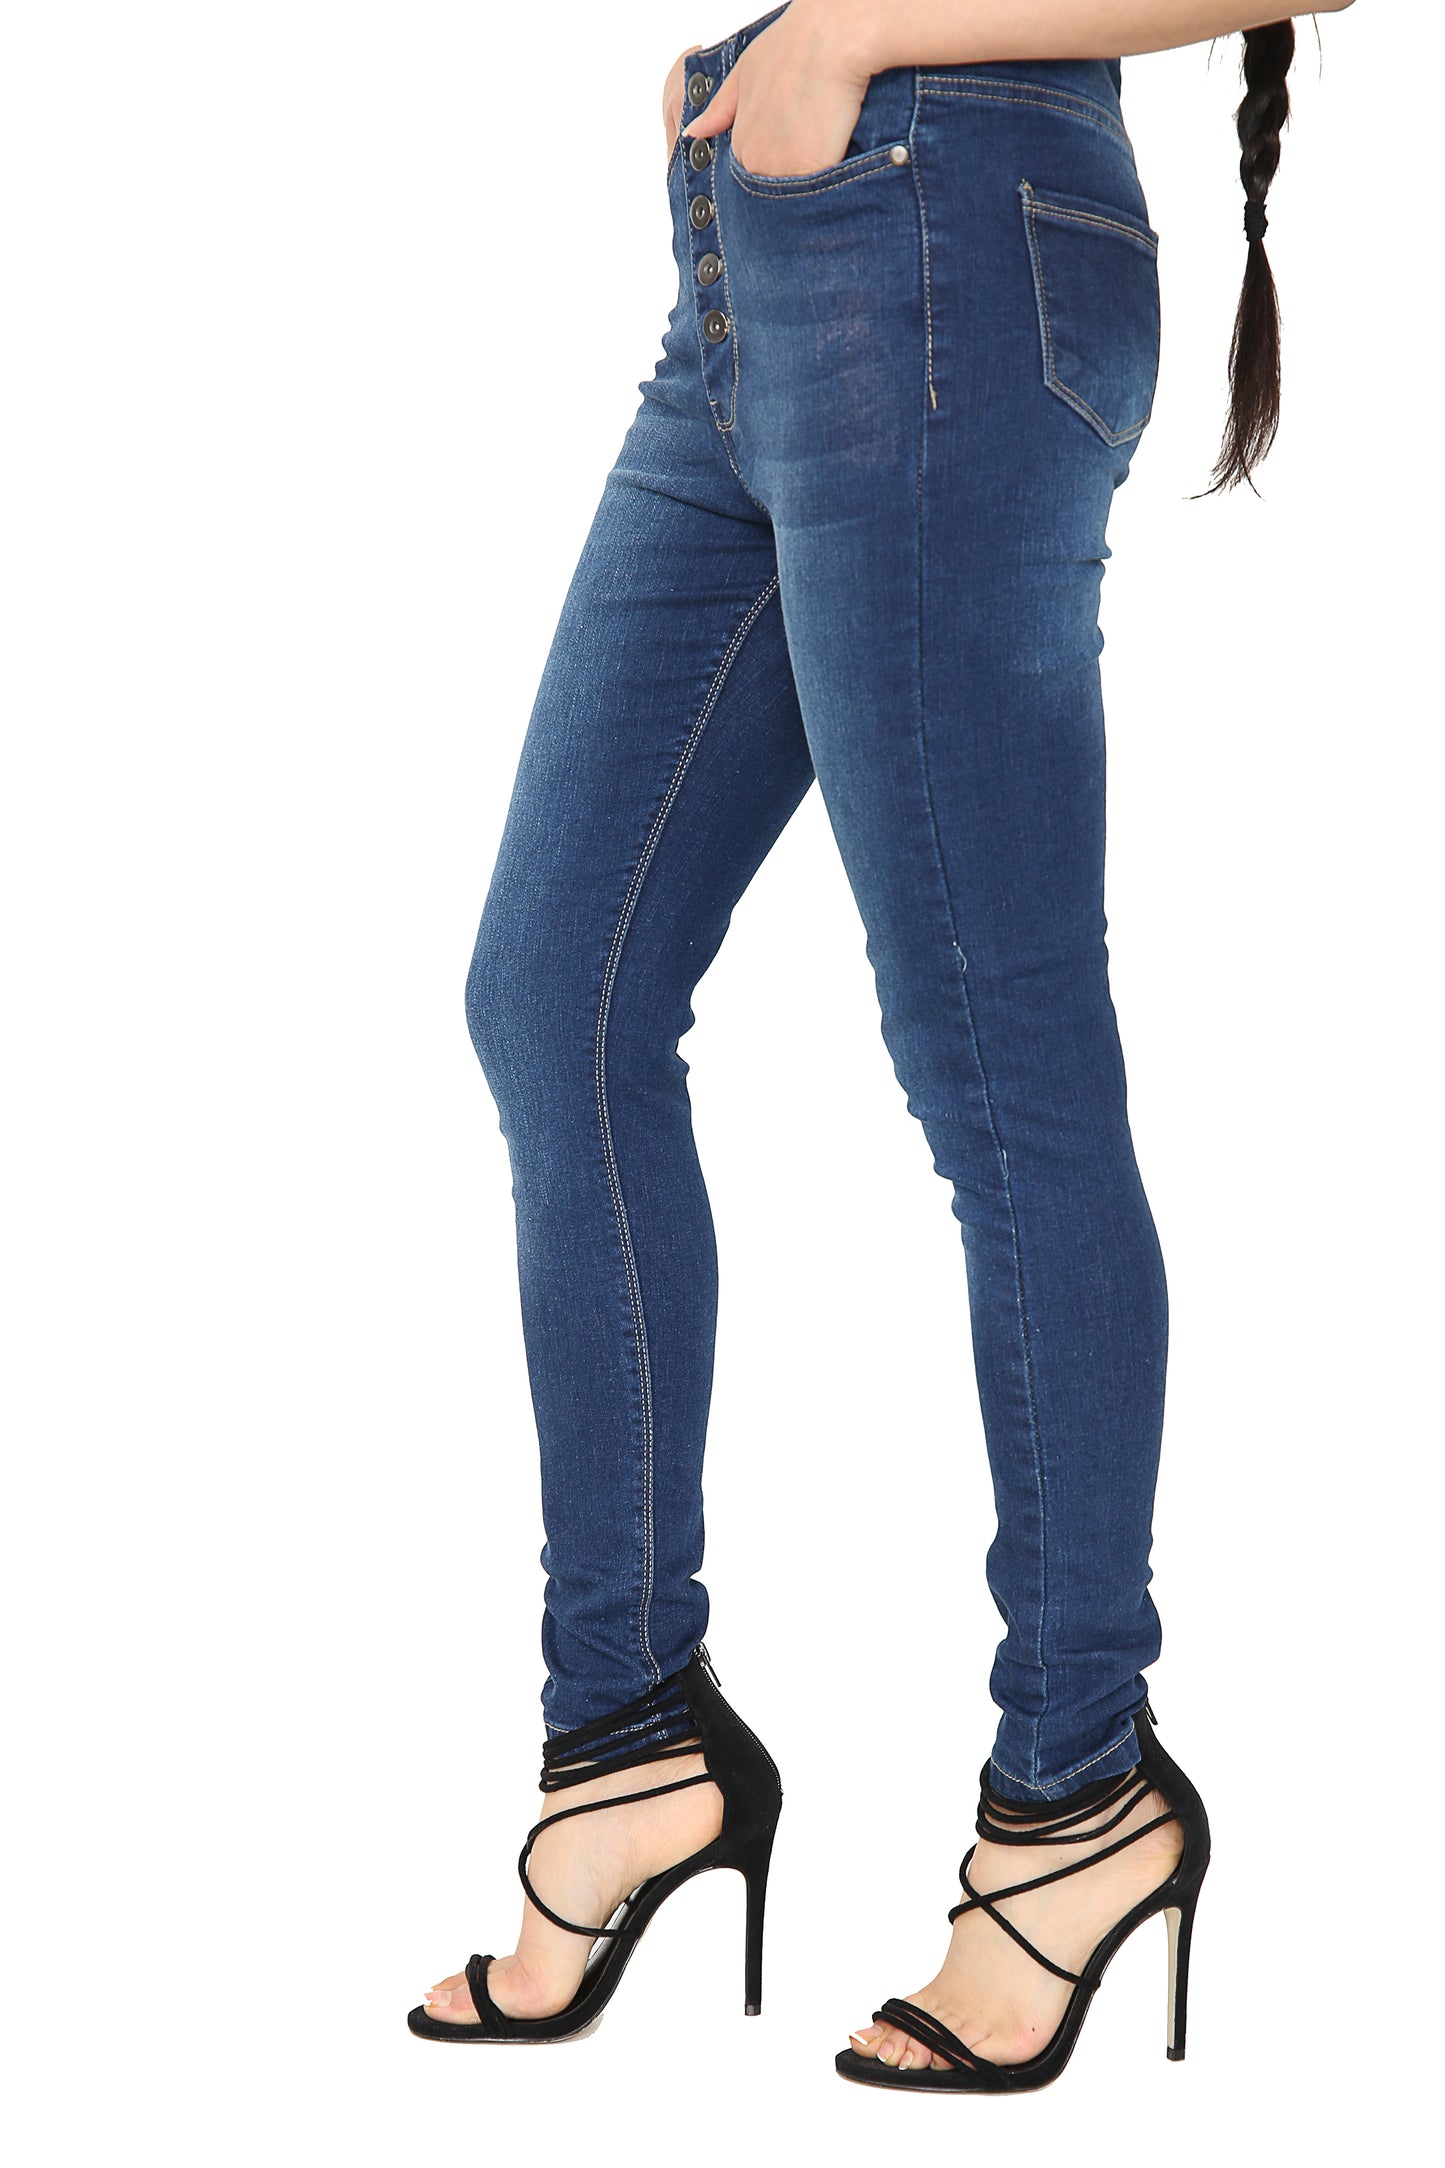 Ladies Side View Of Jeans